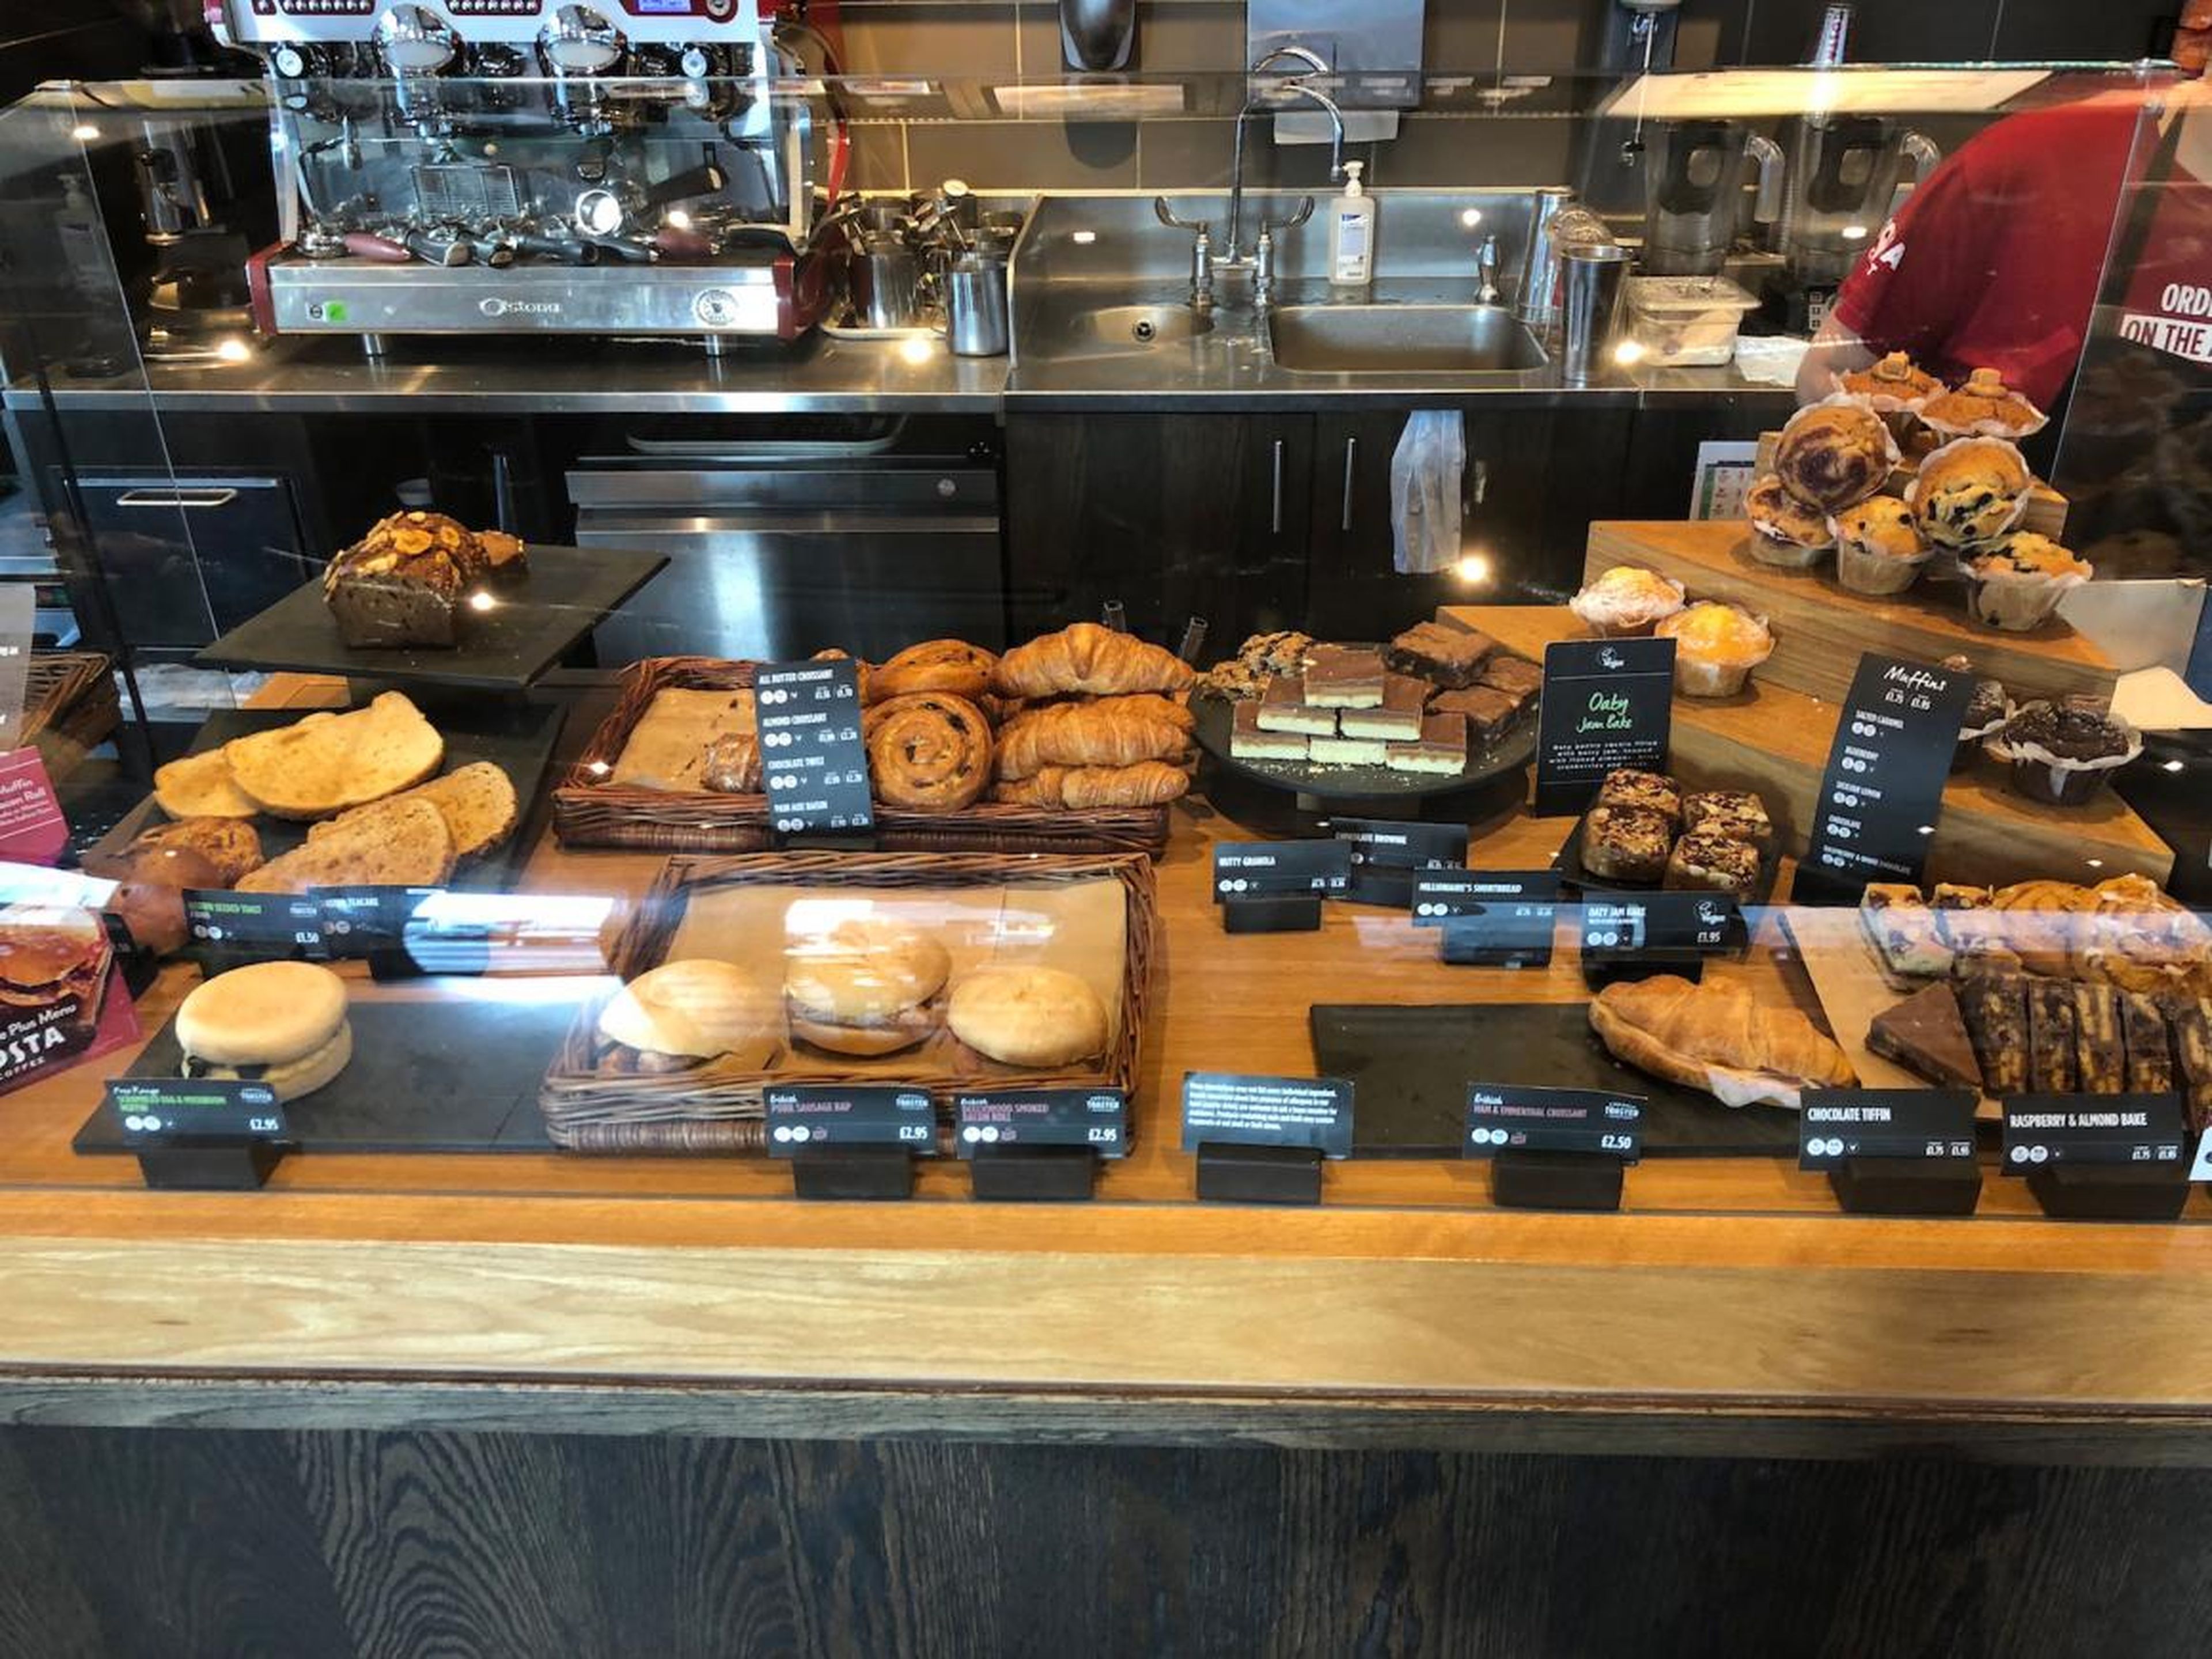 Costa also sells baked goods, from pain aux raisins to millionaire's shortbread. At this point, staff members told me to stop taking photos — so I did.